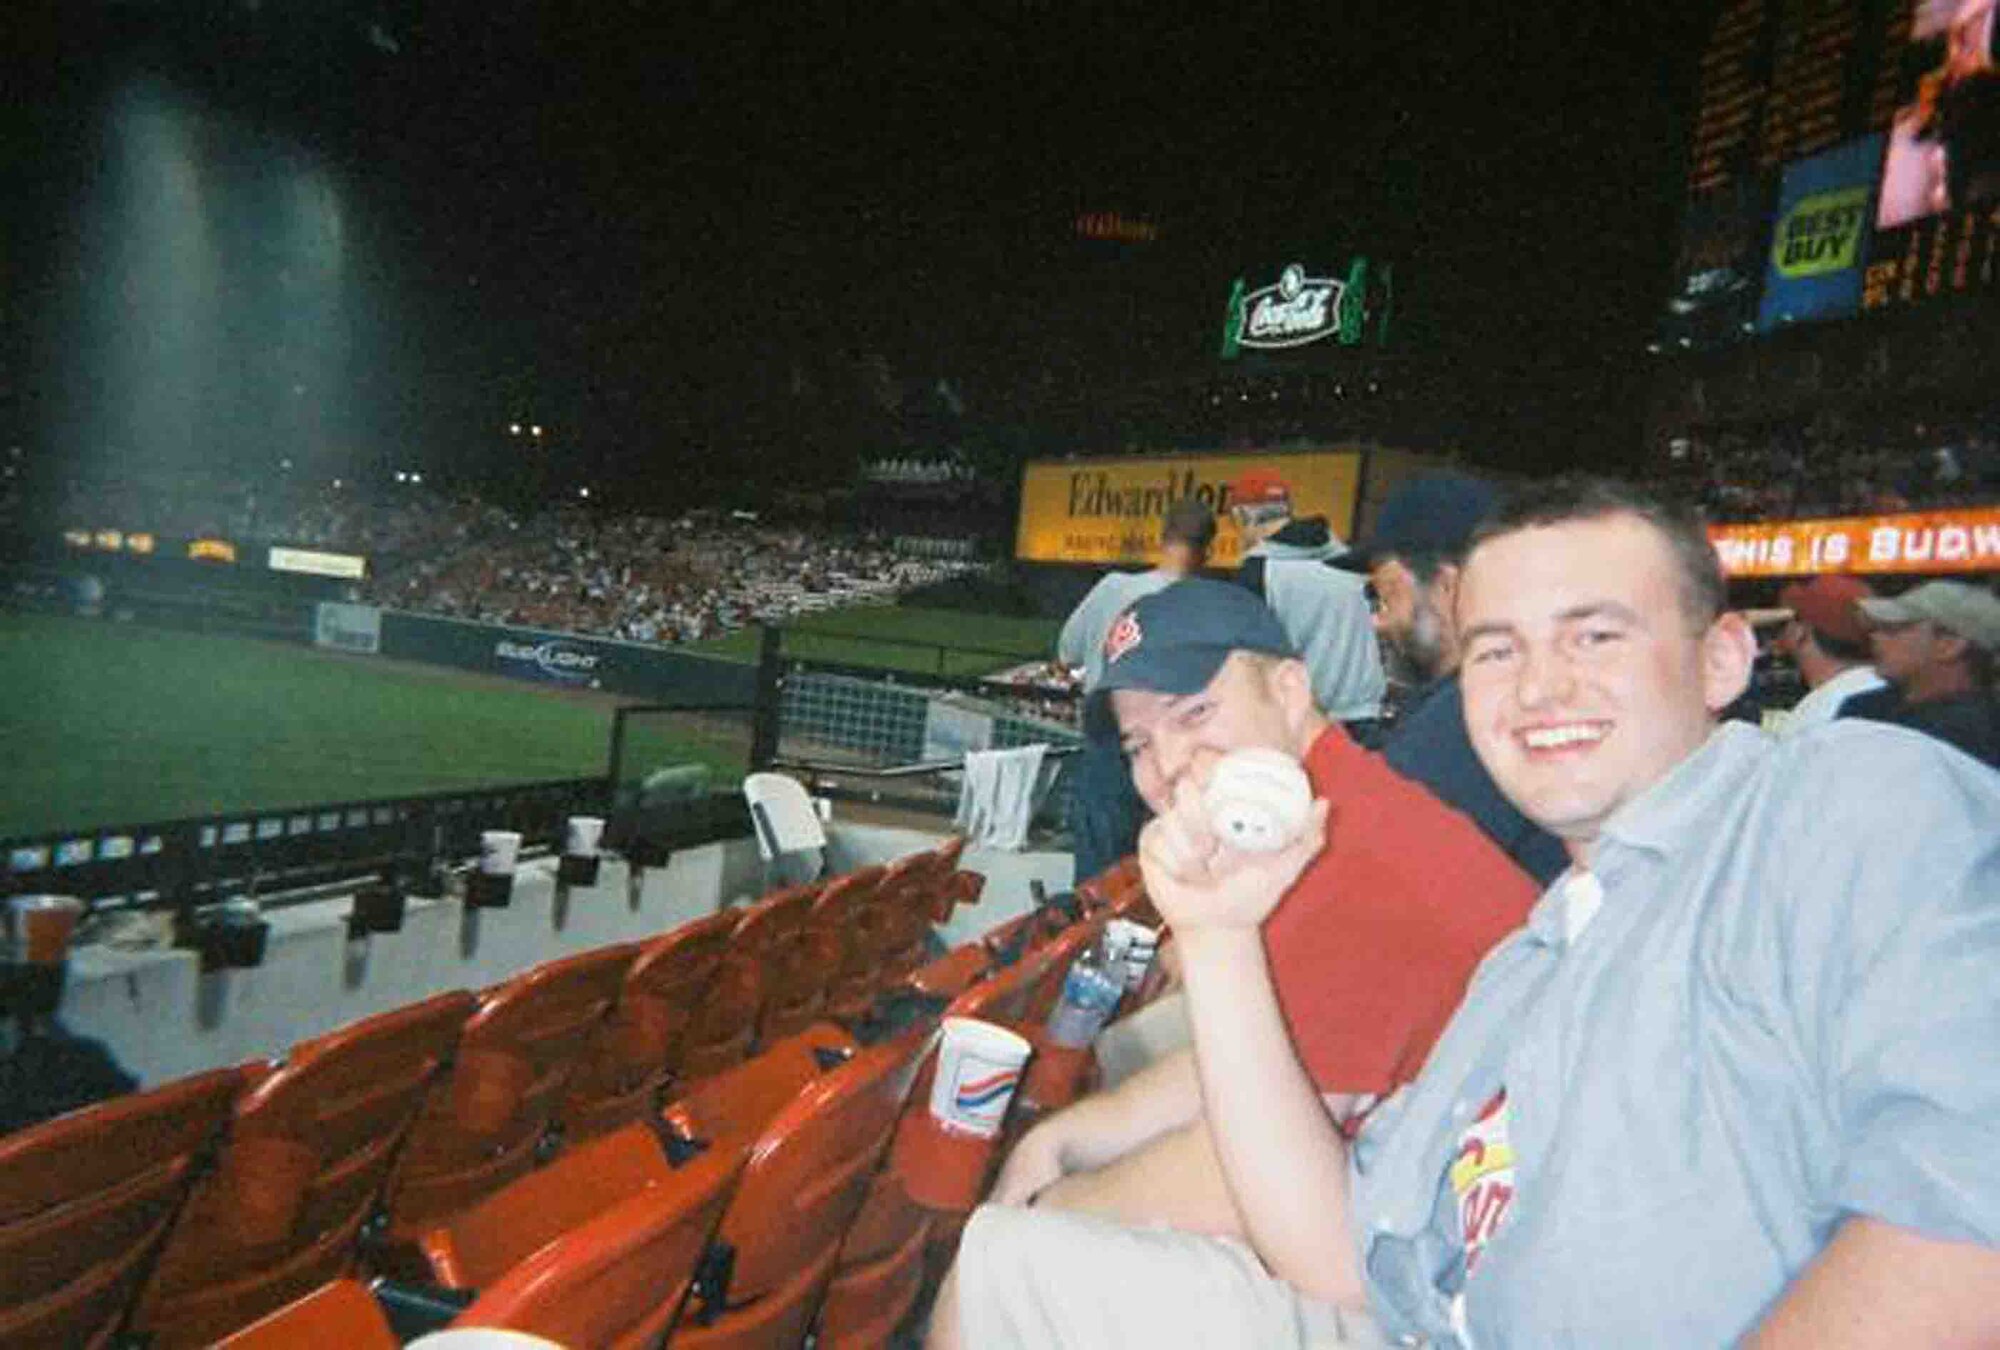 ST. LOUIS -- Second Lieutenant Christopher Franks, 20th Operations Support Squadron, shows off the 564th home-run ball that Ken Griffey Jr. hit April 24 at Busch Stadium. The home-run ball that Lieutenant Franks caught broke the tie with Reggie Jackson for 10th place on the baseball career list. (Courtesy photo)